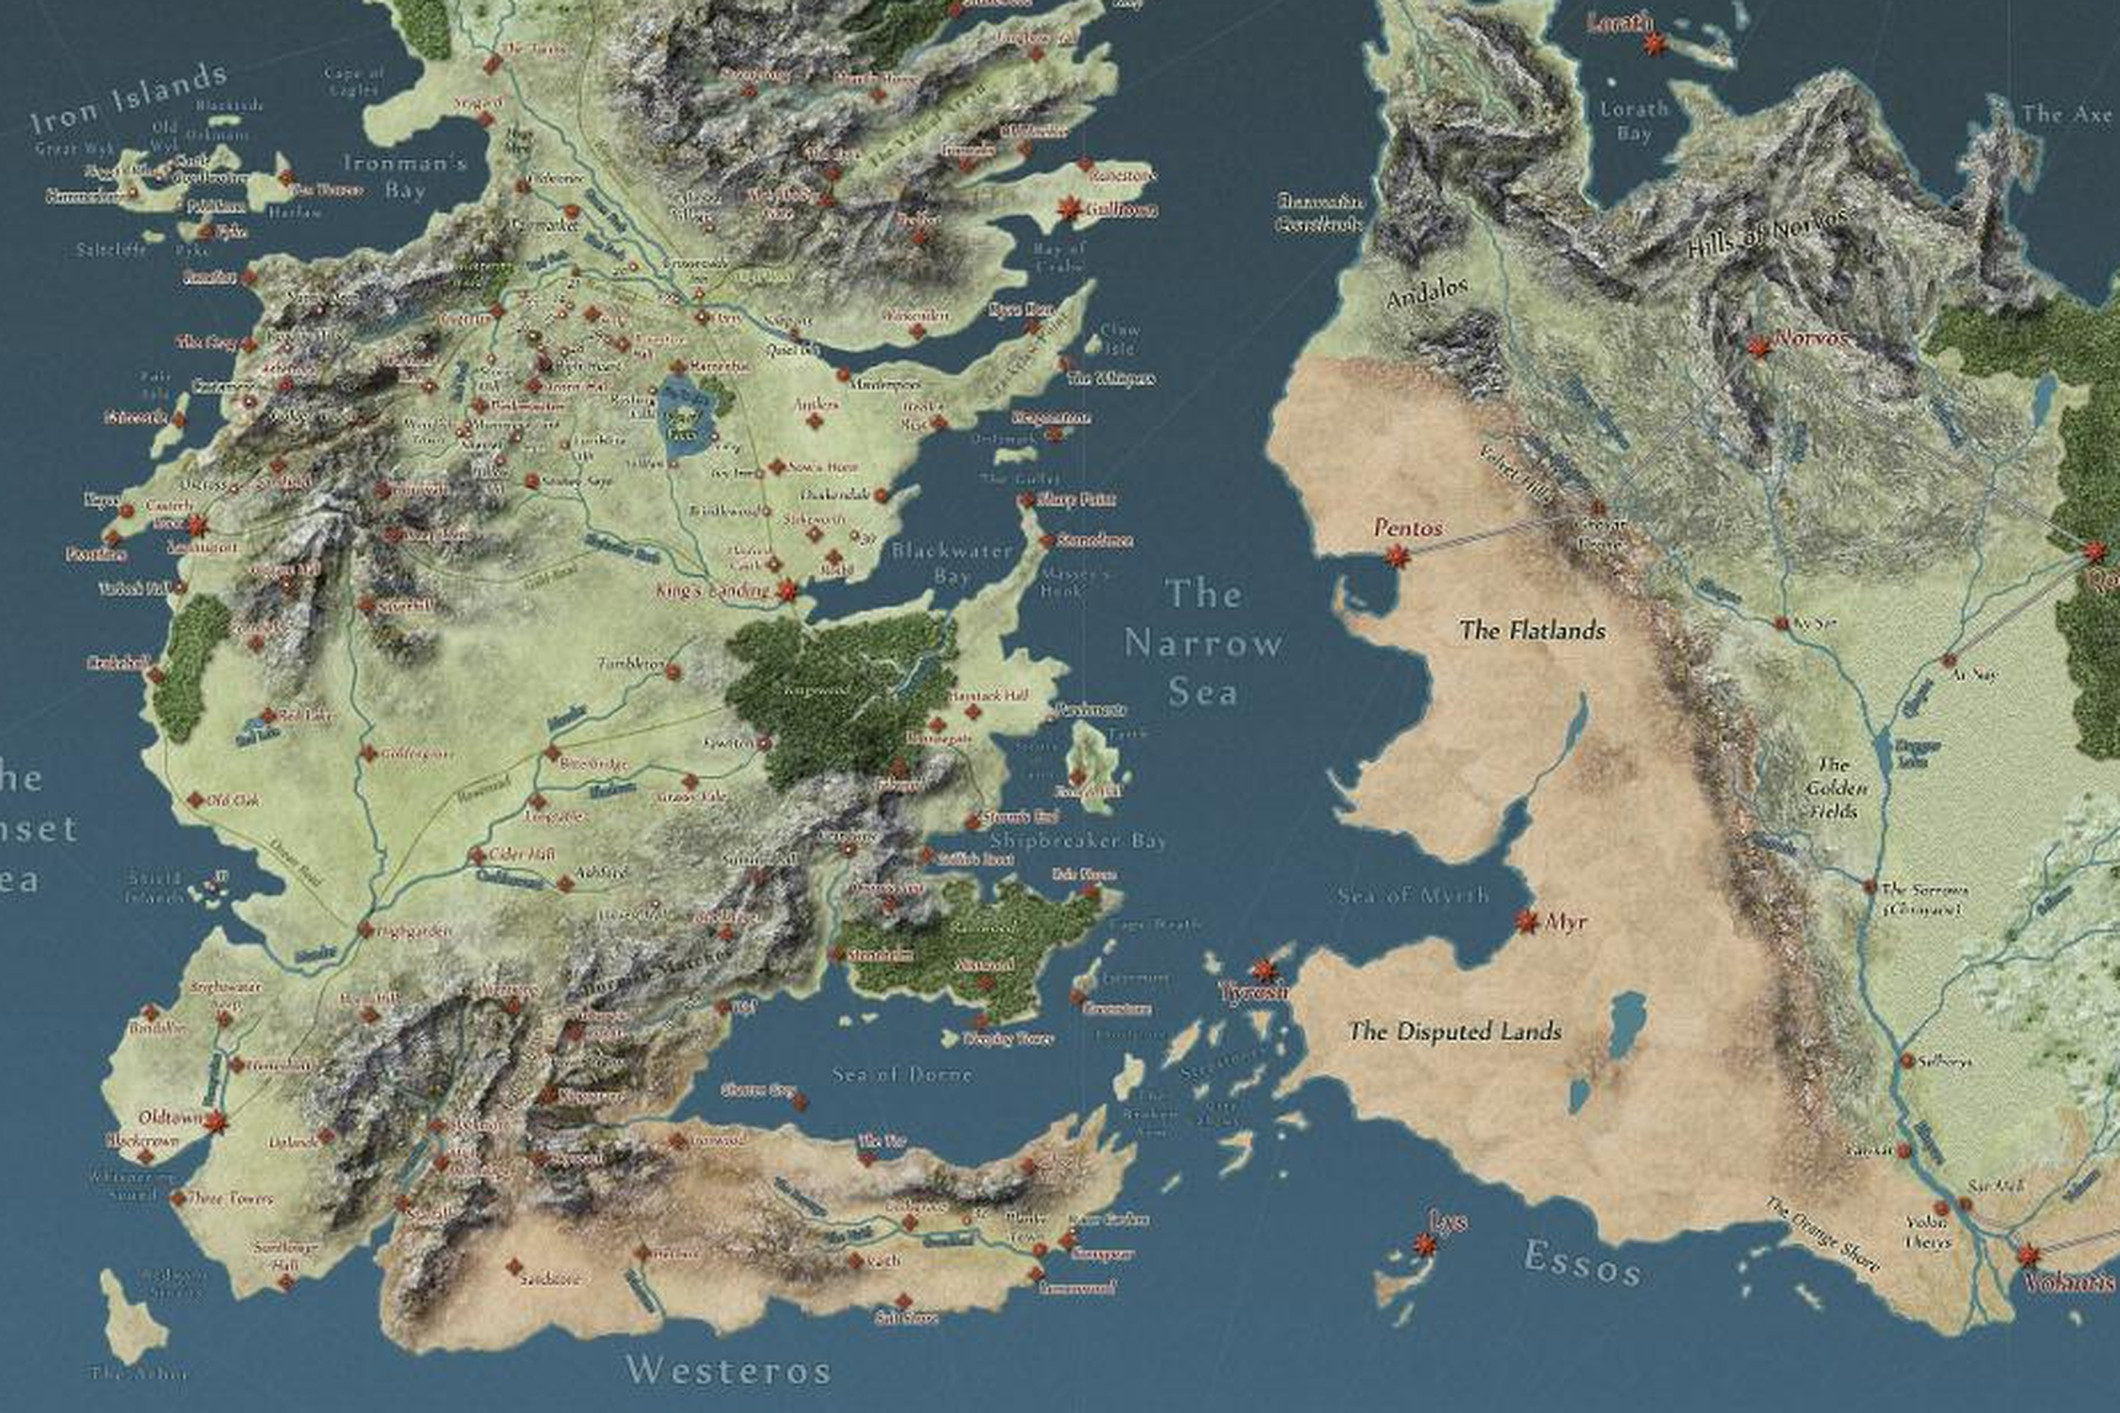 Interactive Game Of Thrones Map Will Make You An Expert On Westeros 